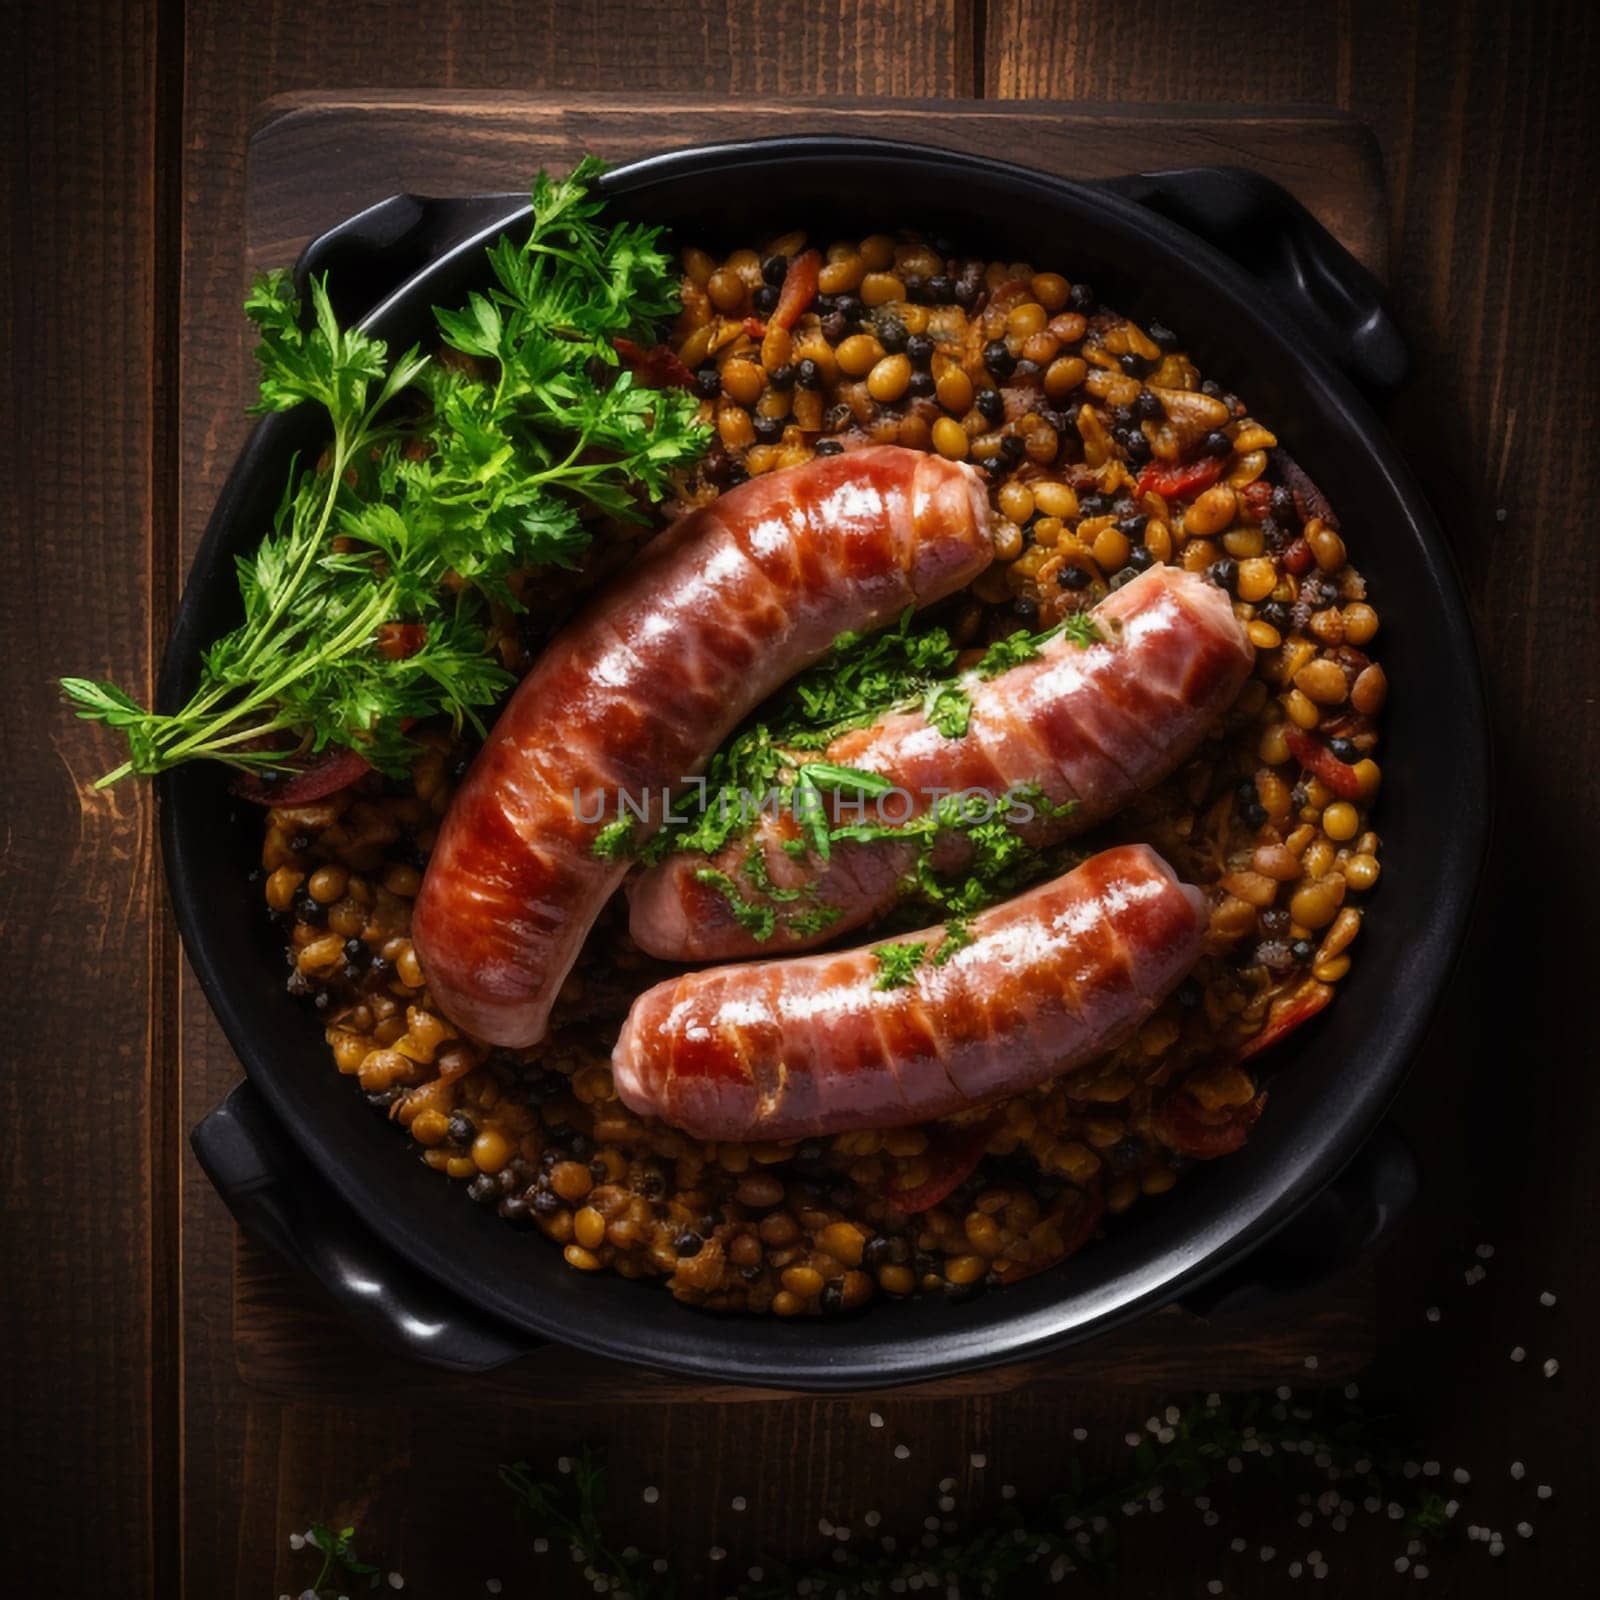 Cotechino with lentils raditional a Emilia-Romagna dish, with sausage served with lentils, symbolizing luck and prosperity for the new year.